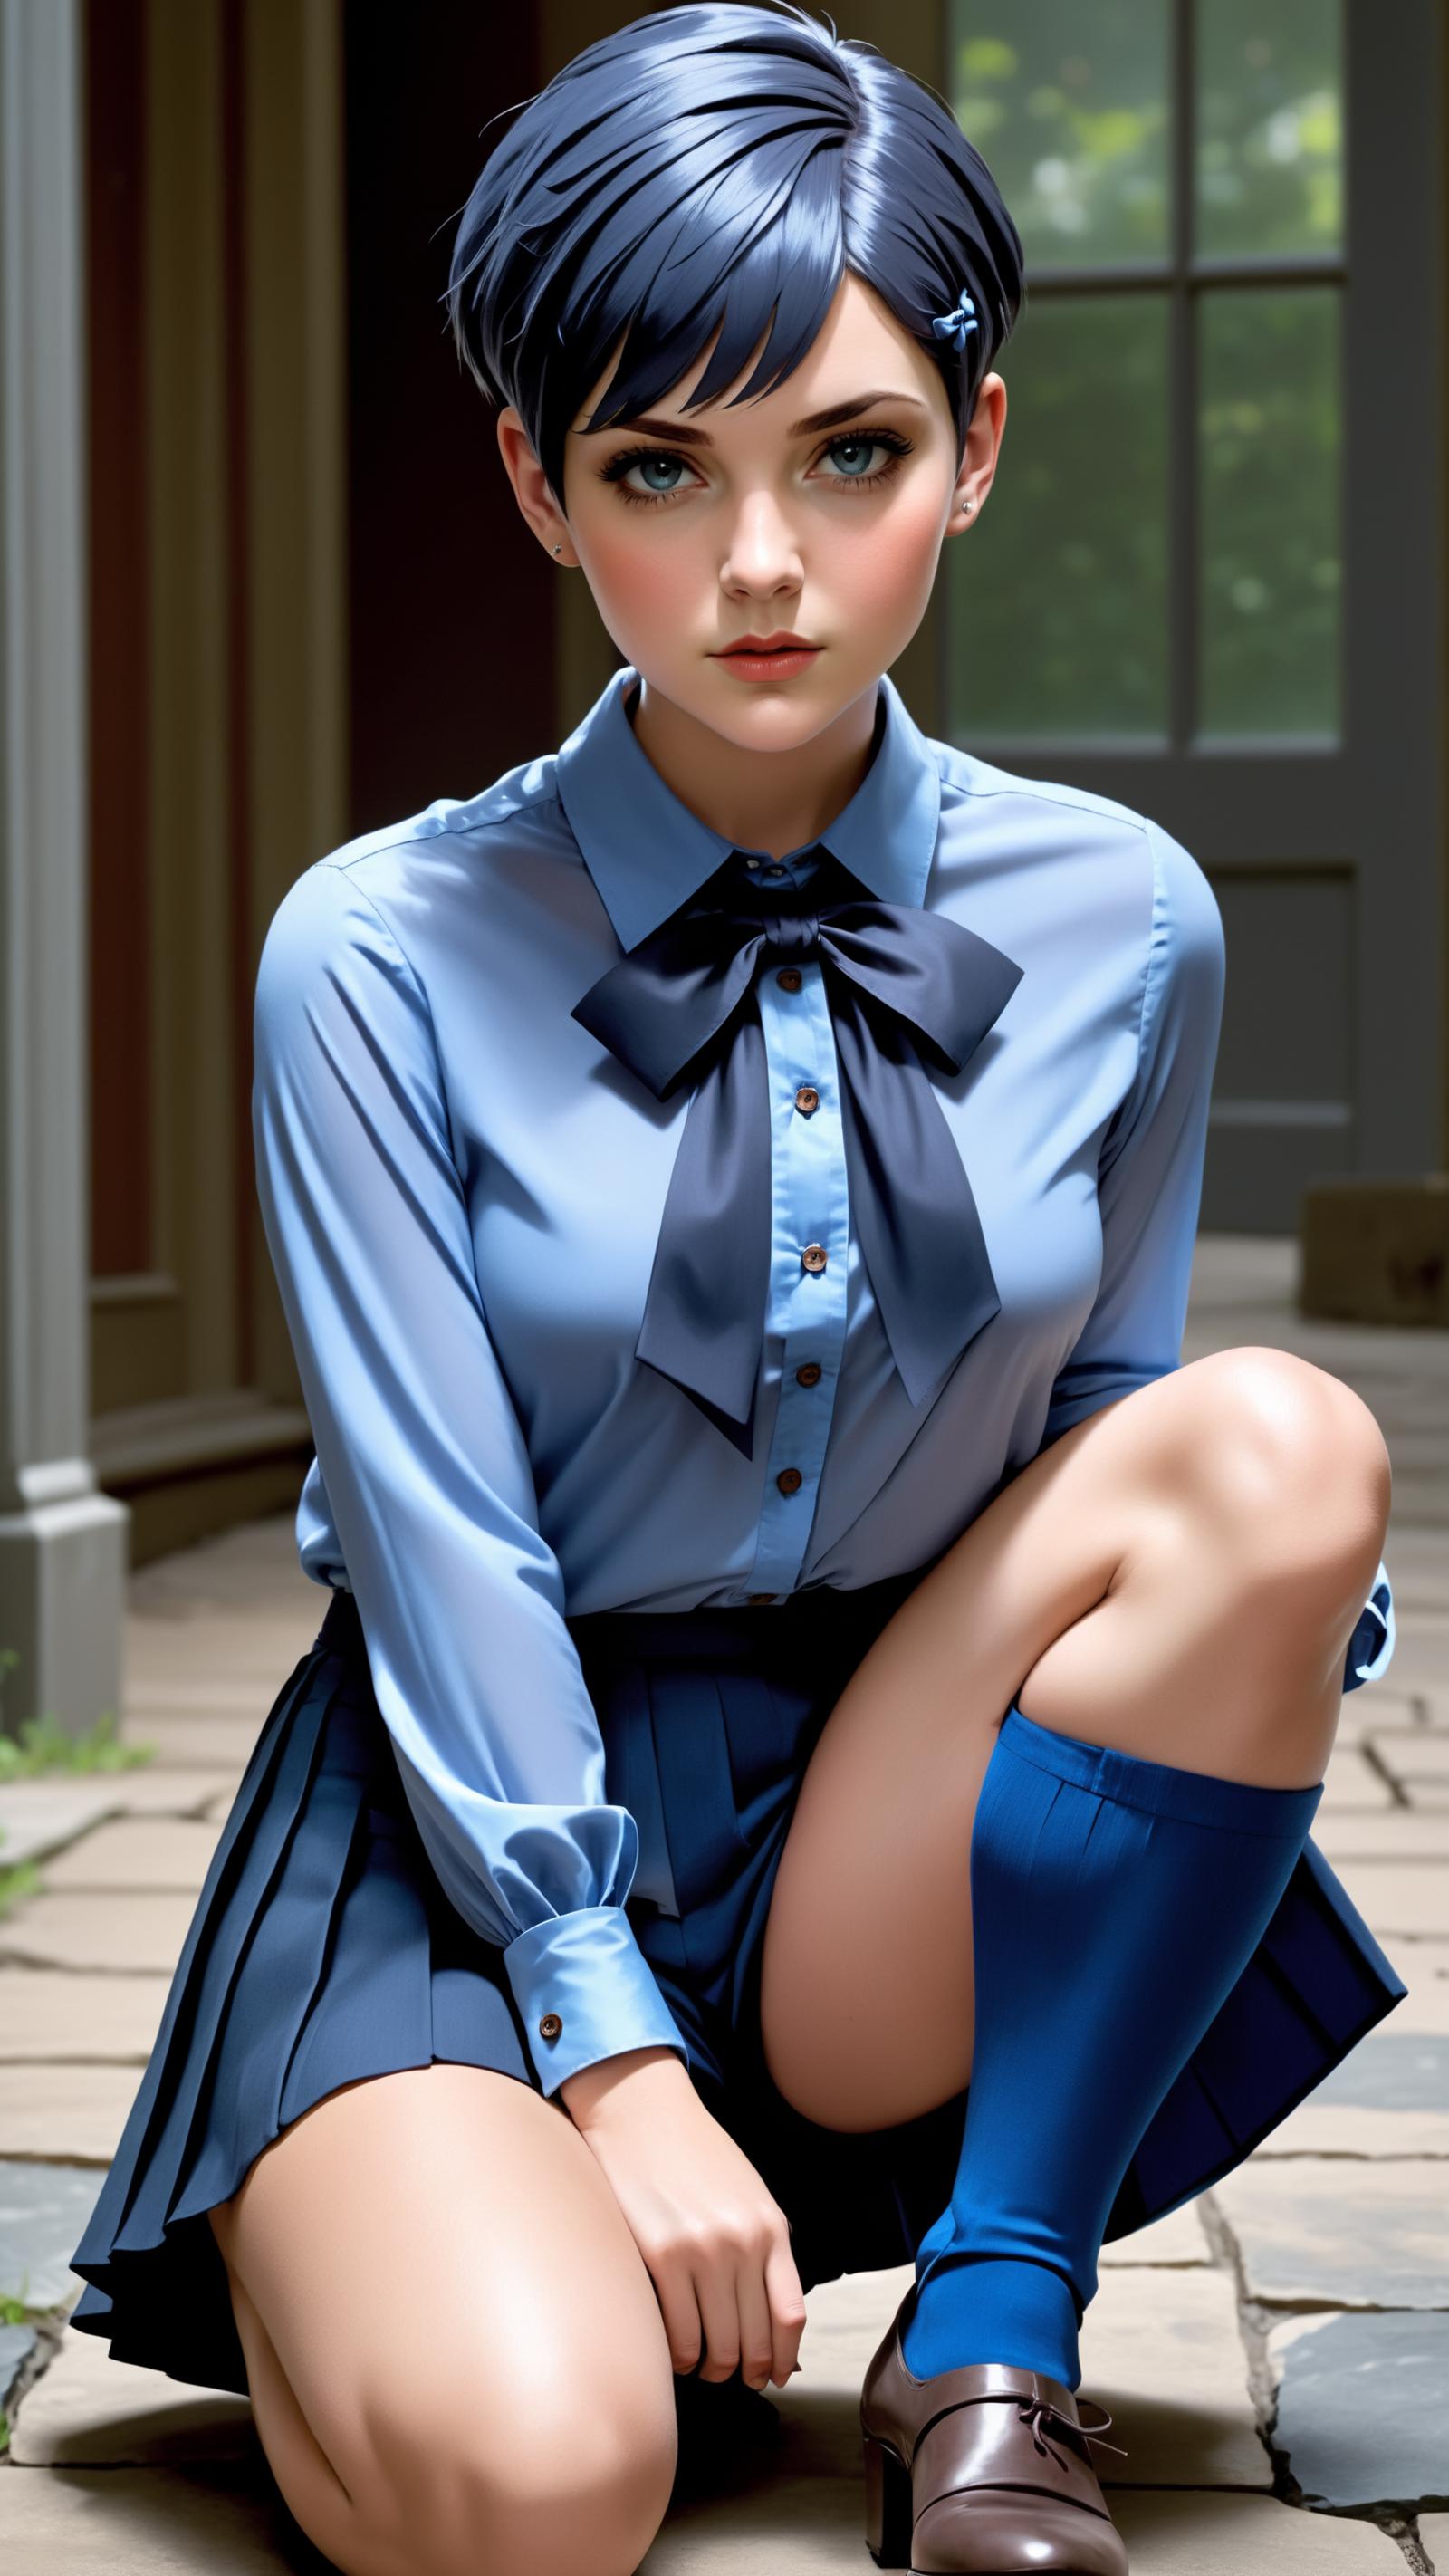 A girl wearing a blue dress and blue socks is sitting on the floor.